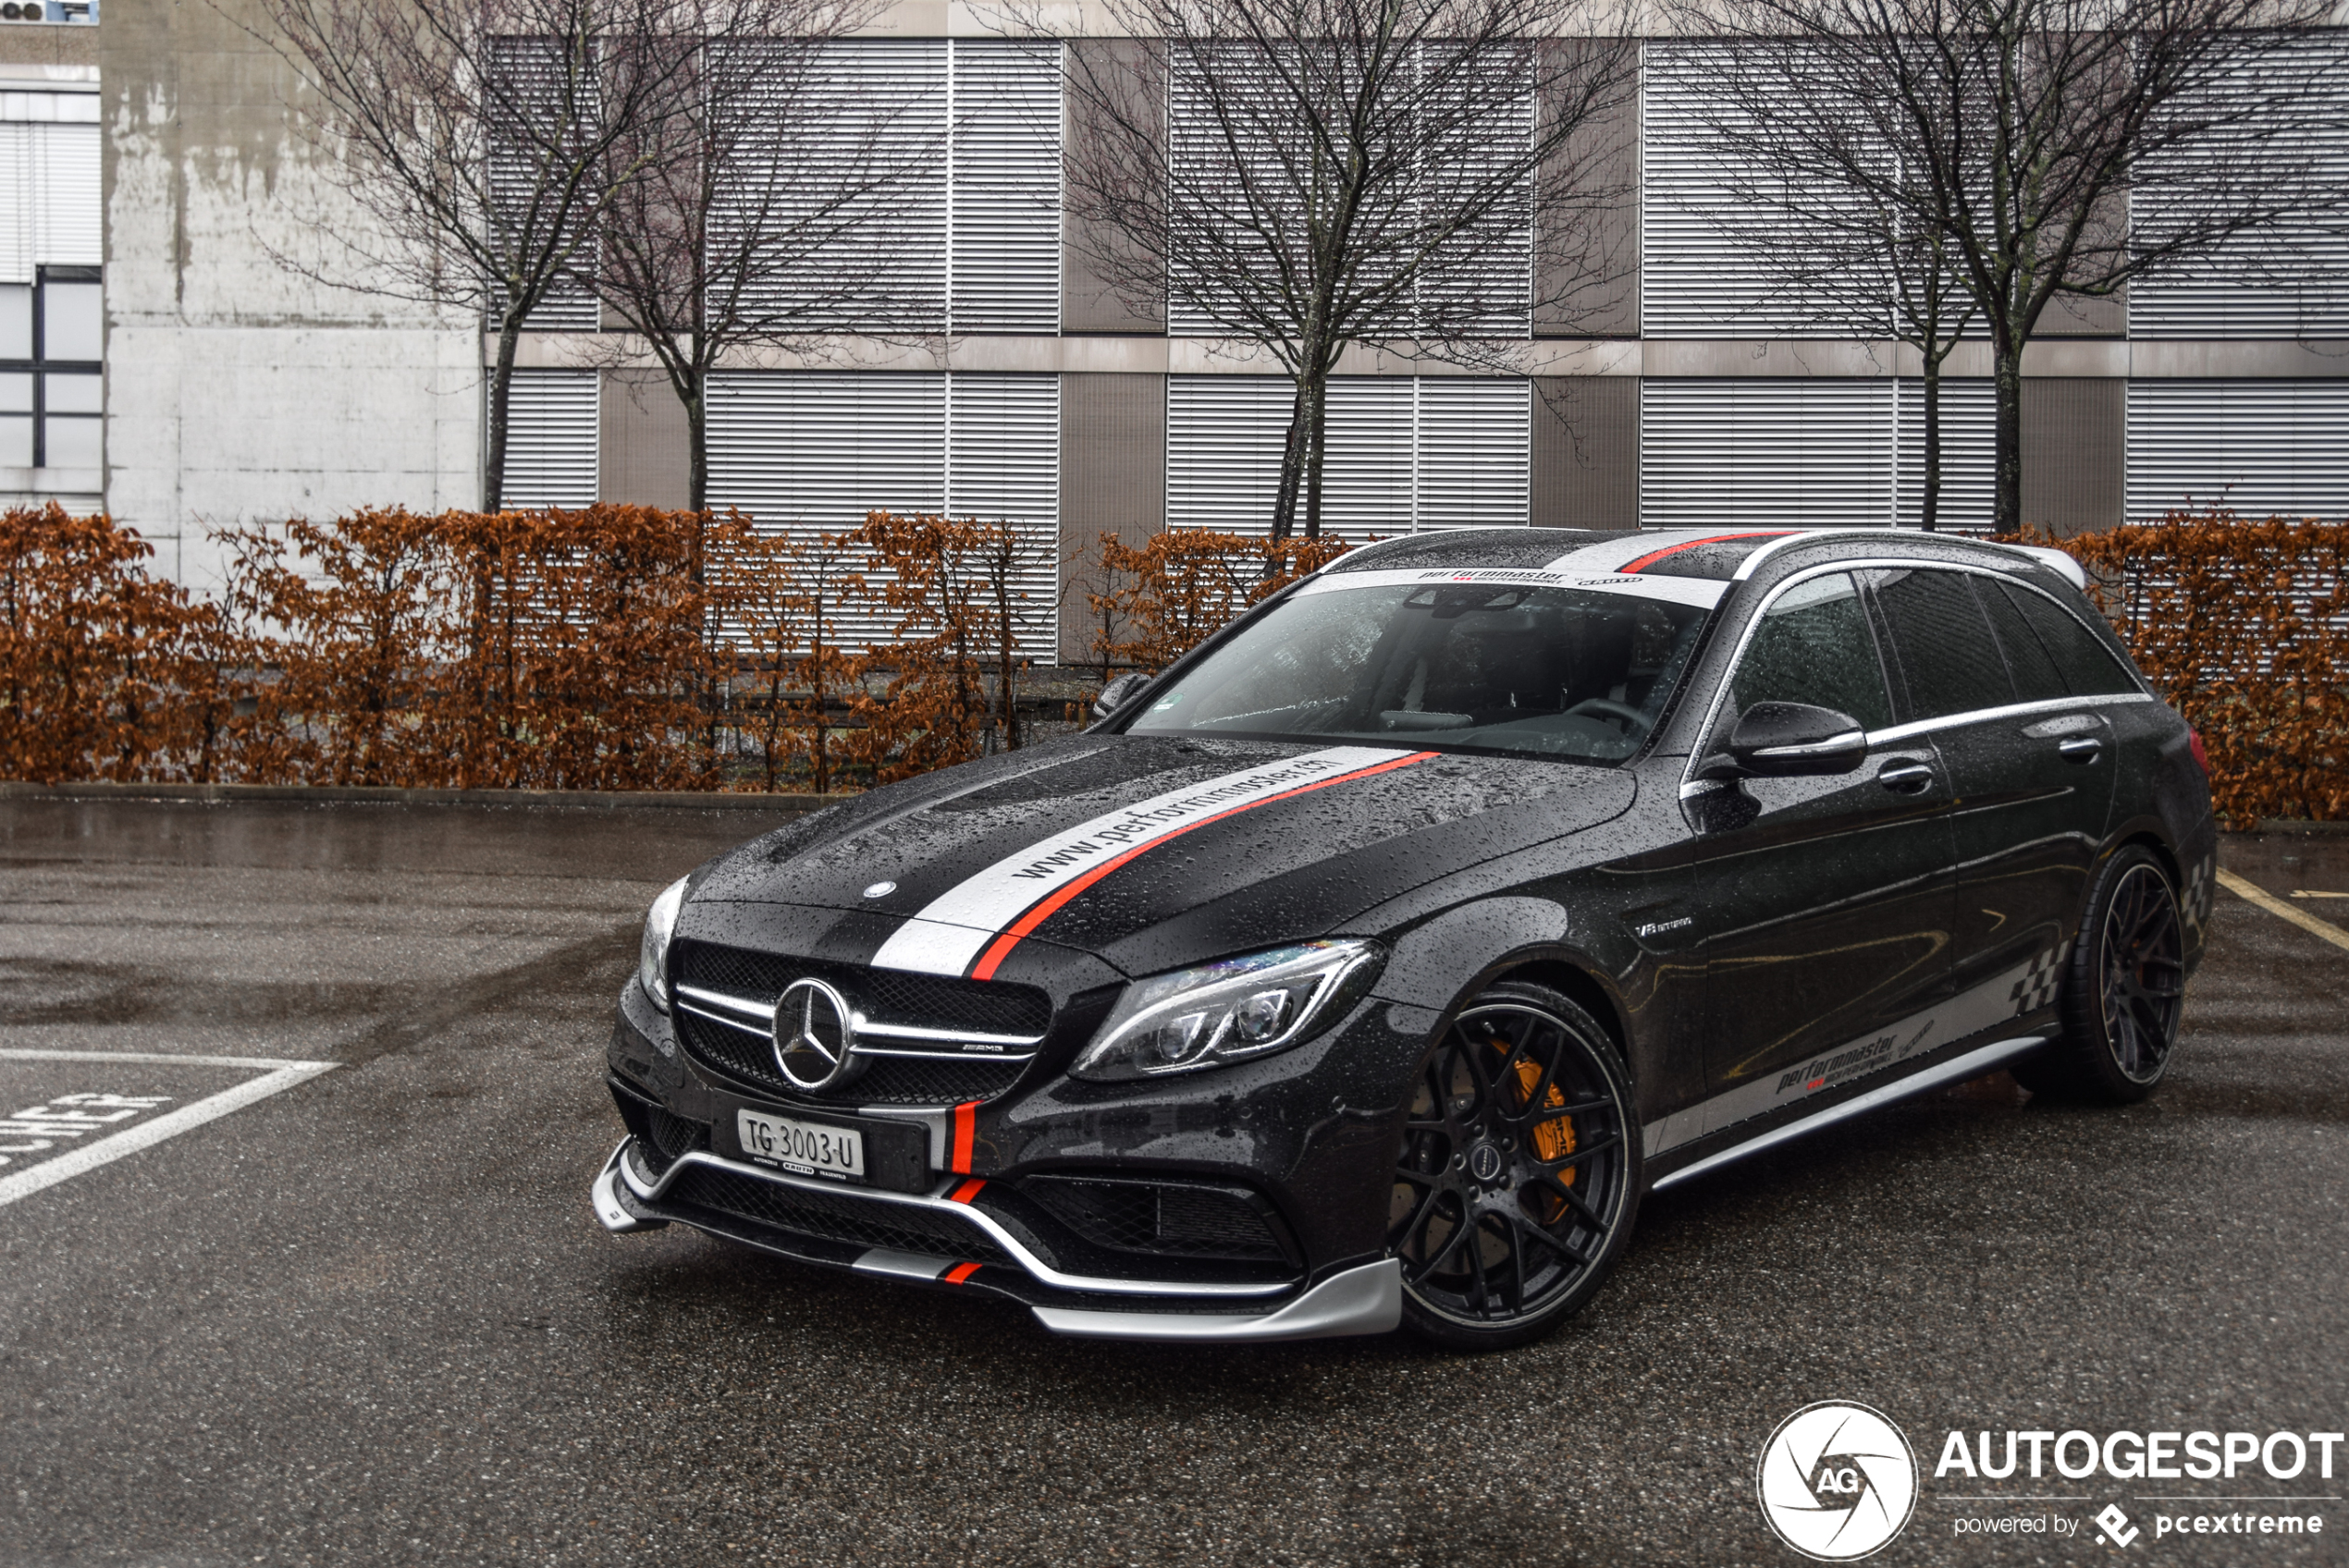 C63 S Estate is looking very aggressive 